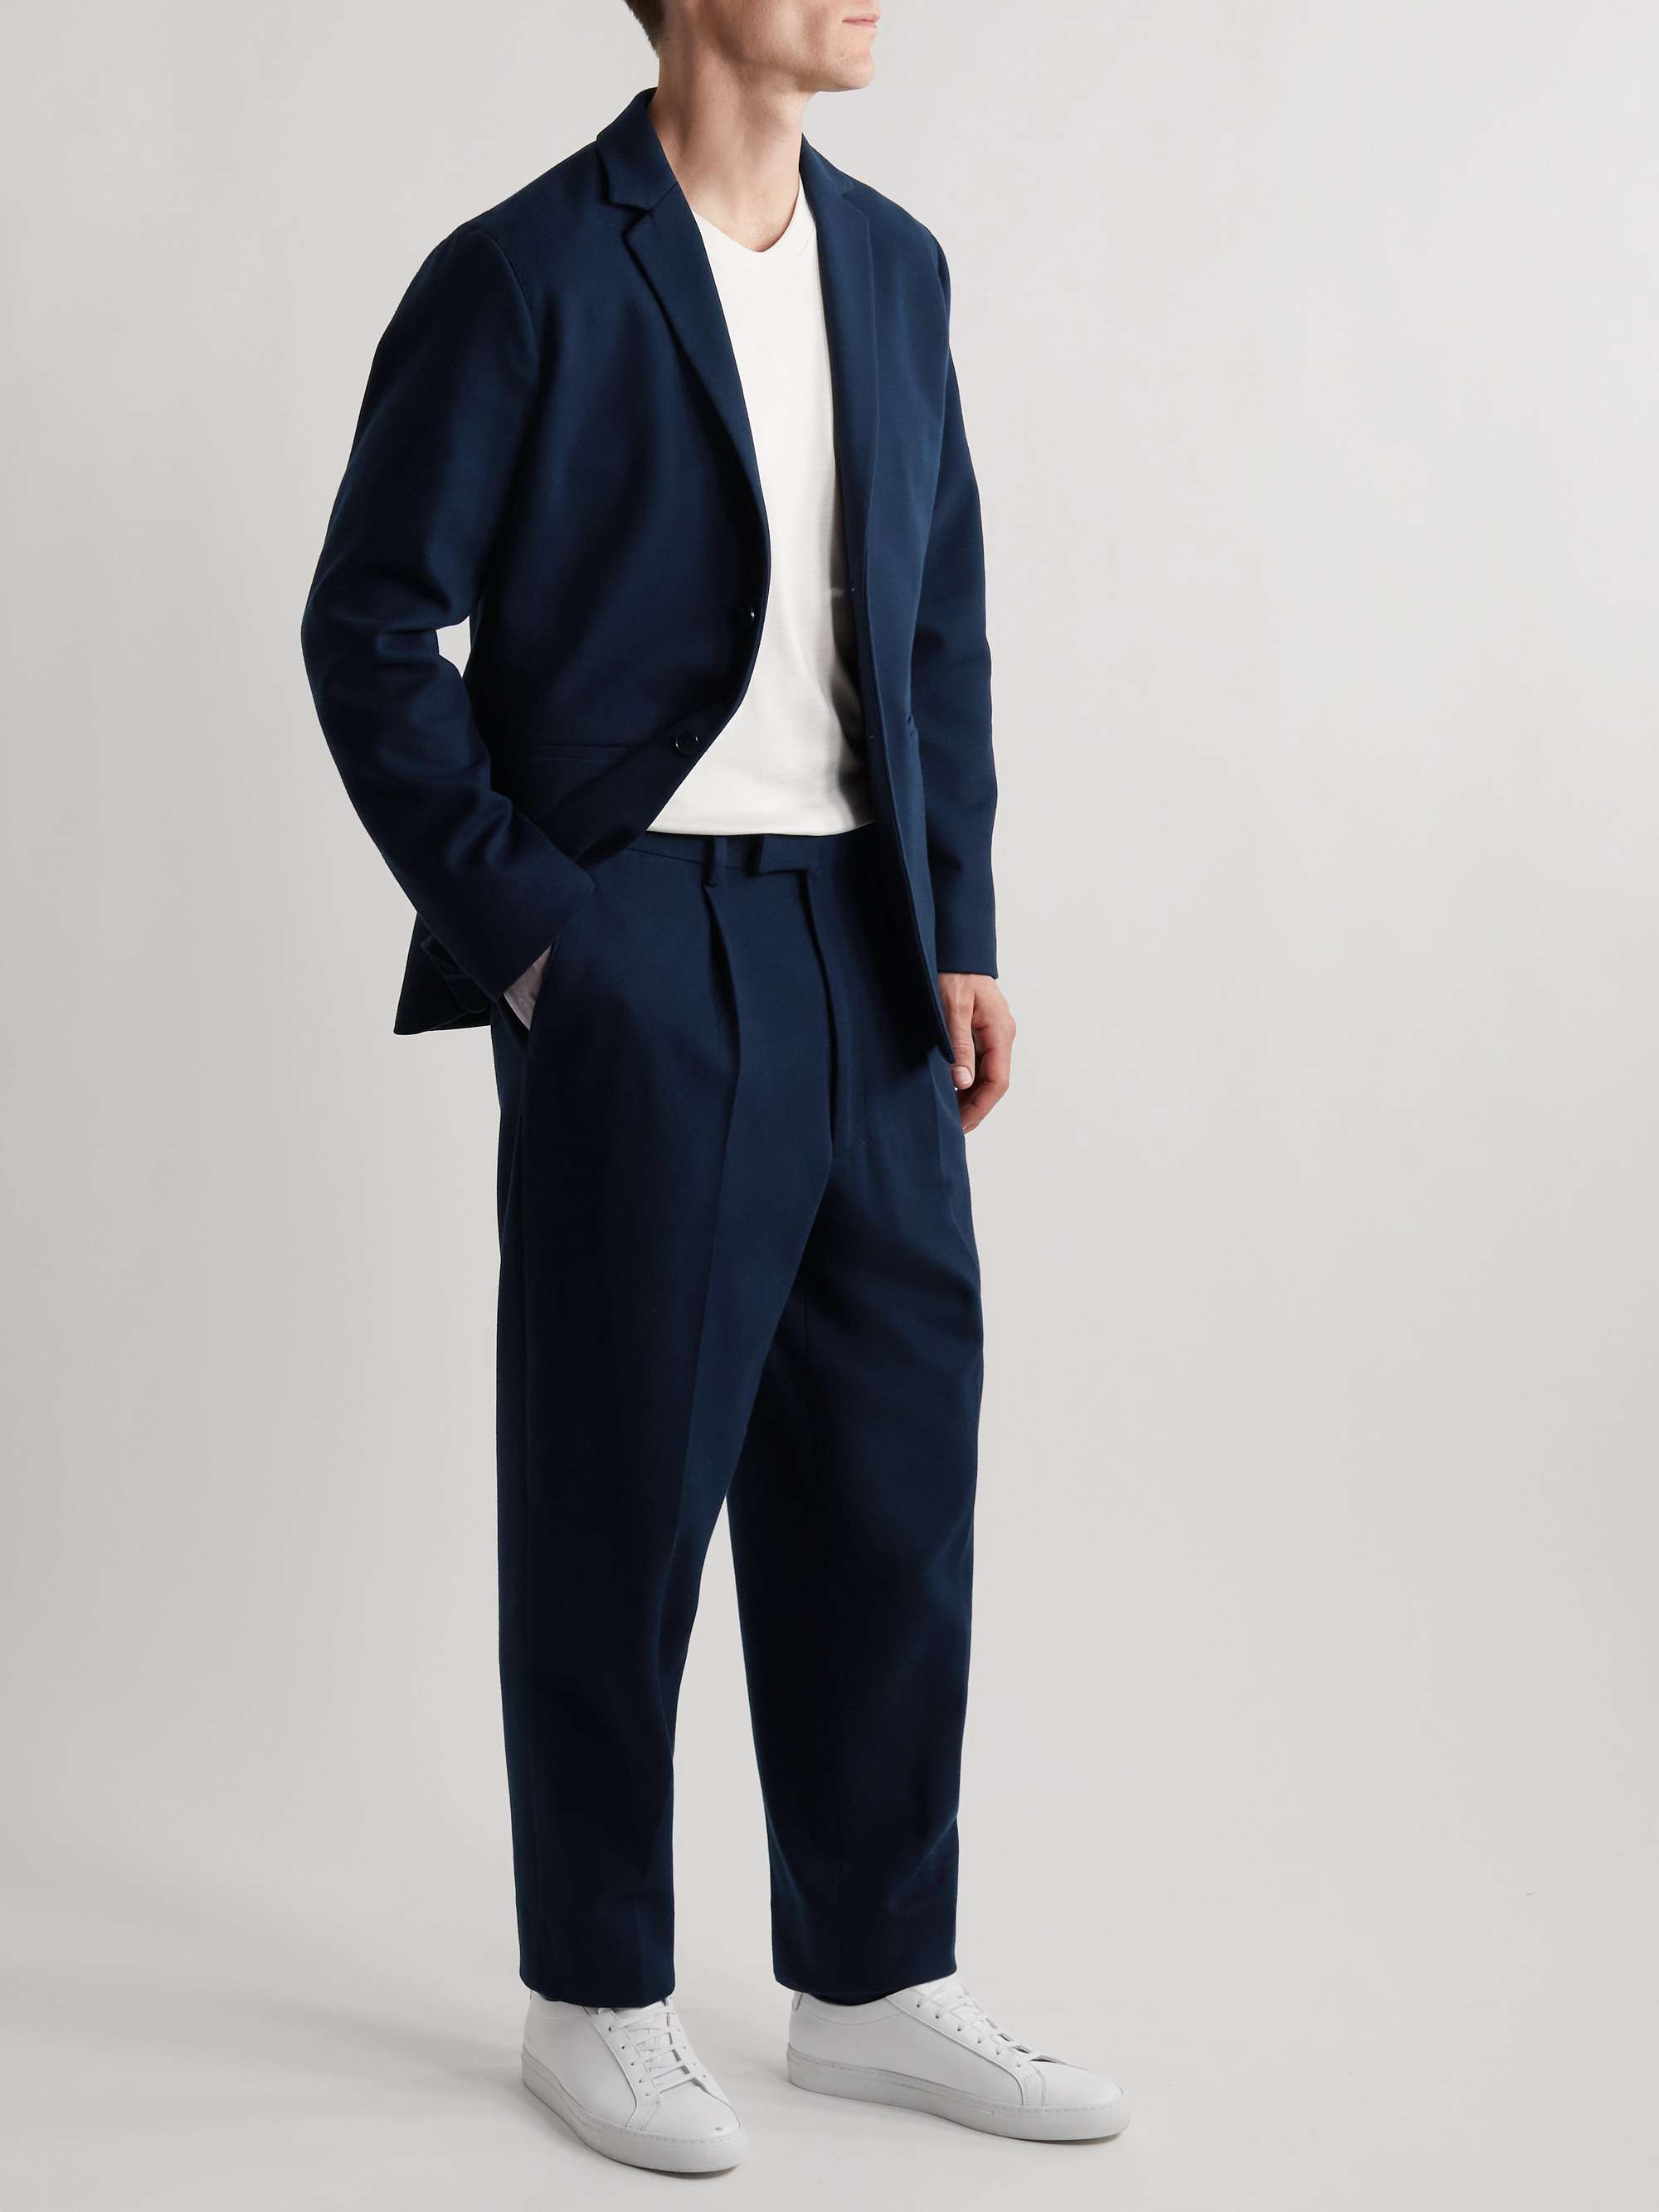 SUNSPEL + Casely Hayford Jago Waffle-Knit Cotton-Blend Suit Trousers